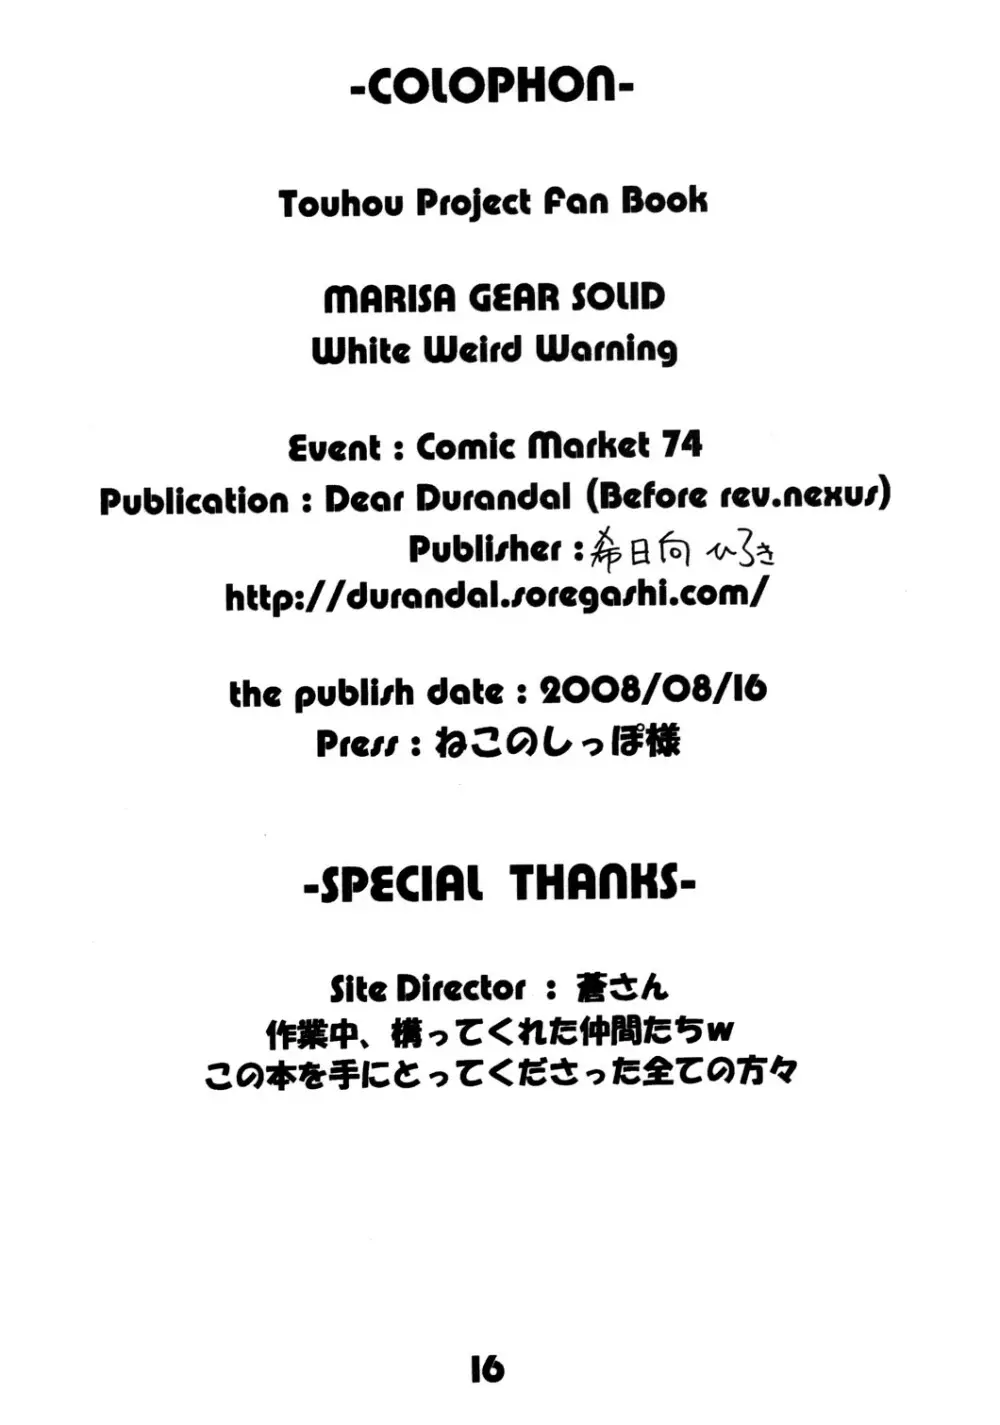 MARISA GEAR SOLID White Weird Warning Page.17